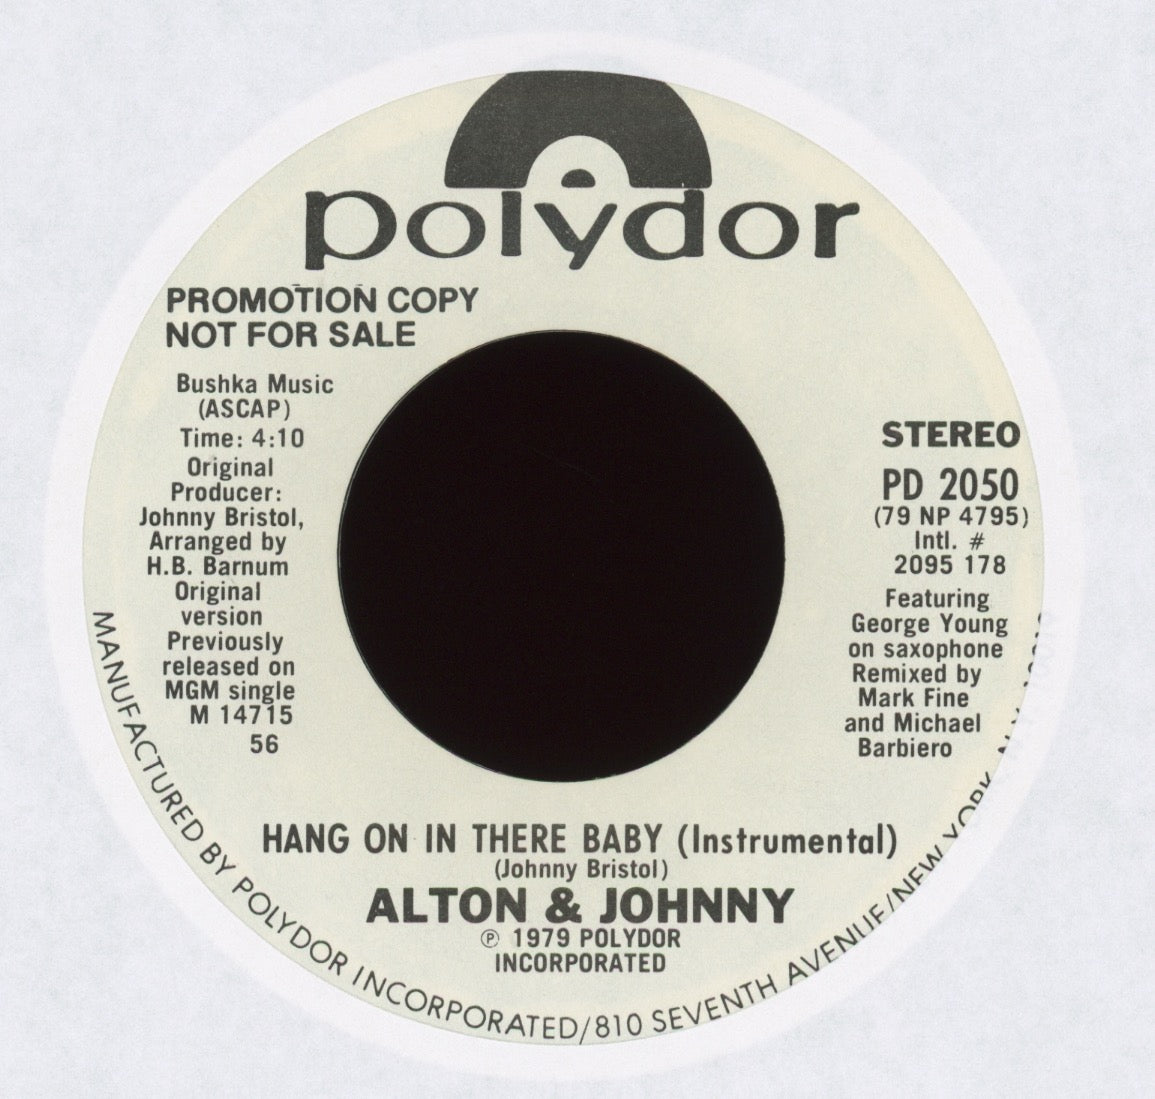 Alton McClain & Johnny - Hang On In There Baby on Polydor Promo